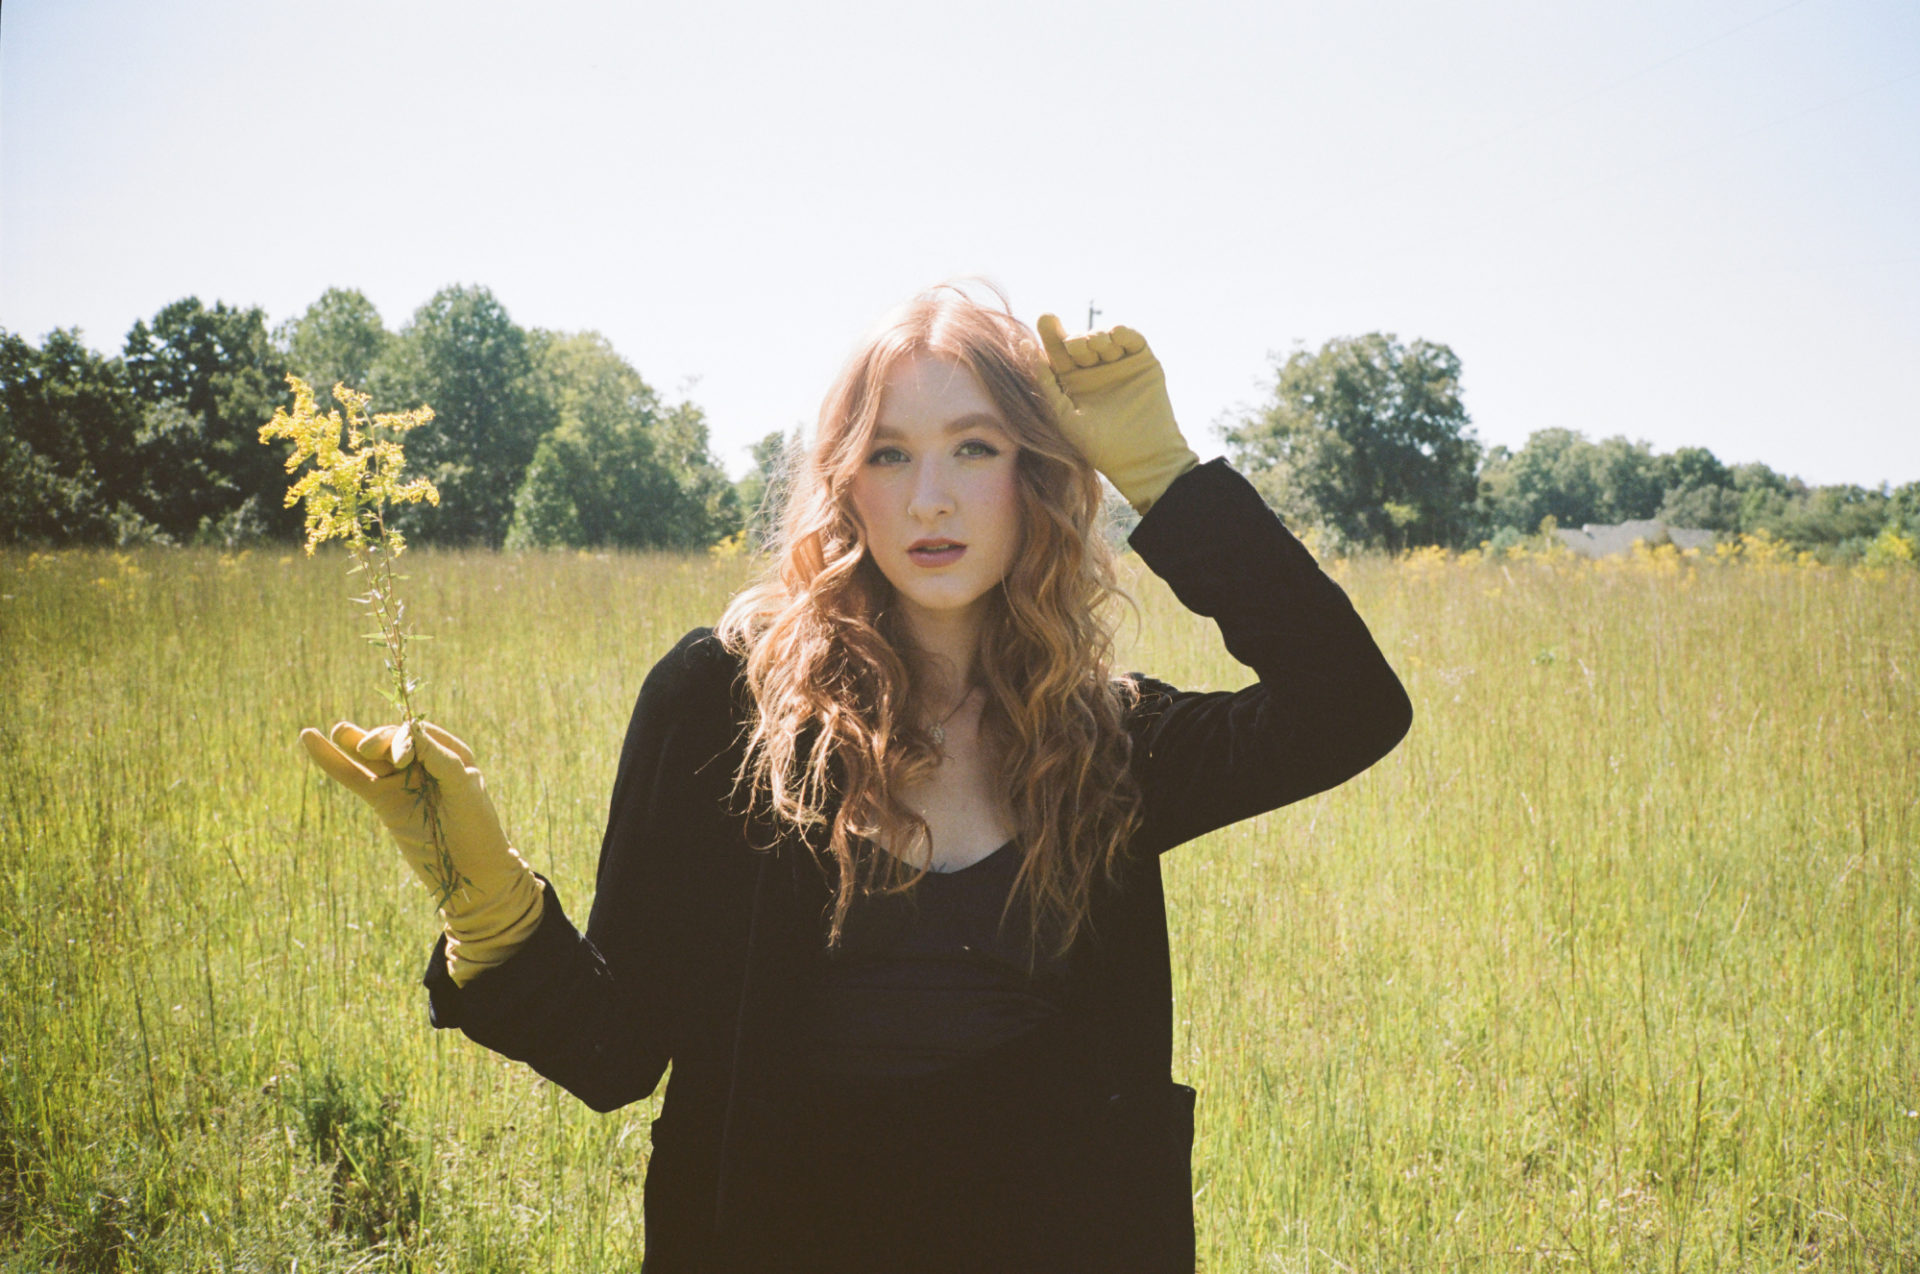 Photo of Bree White. A thin, white woman with long, wavy reddish hair is standing in a field of tall grass. She is wearing all black, including a black jacket, and chartreuse gloves that match the color of the grass behind her. Her left arm is raised to the side of her head and he rright arm holds a yellow flower. Photo by Bree Fish.